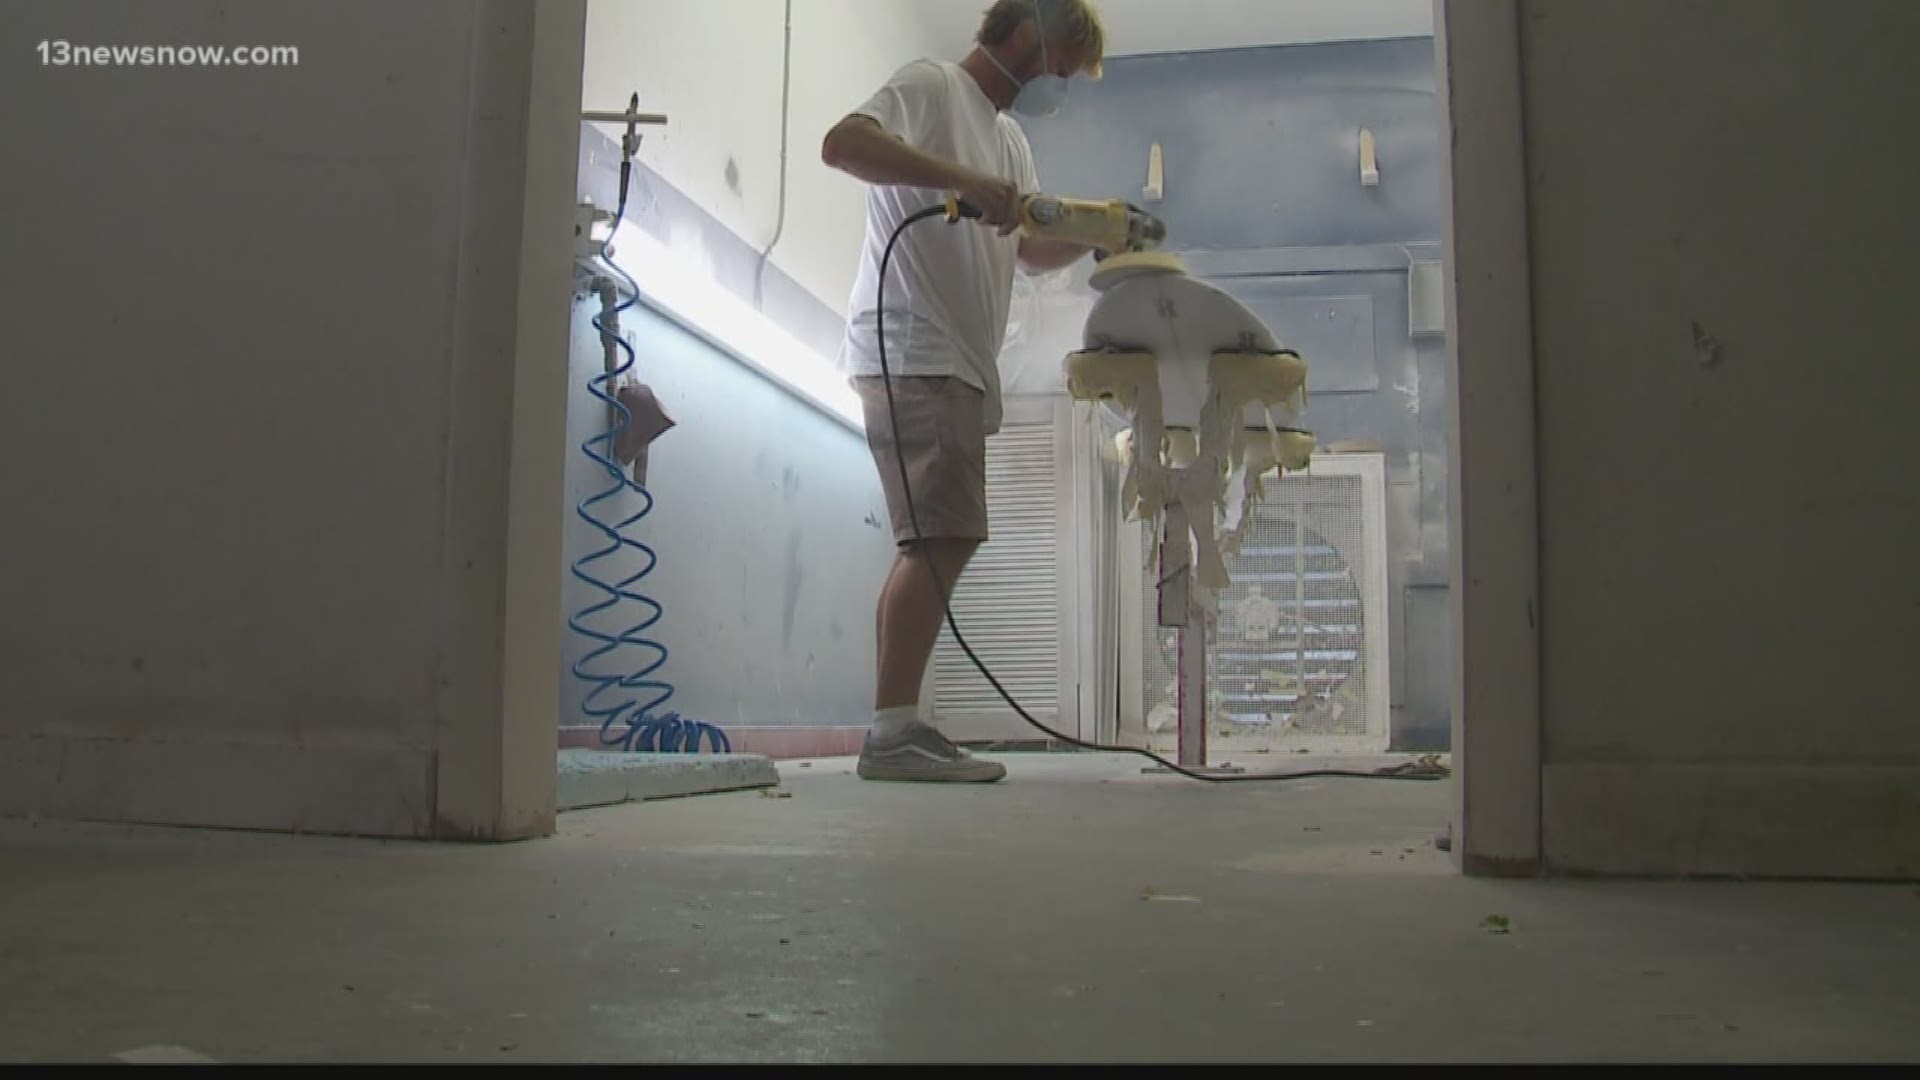 On this week's Inside Access, Crystal Harper takes us to the Outer Banks where we get a behind-the-scenes look at the surfboard factory, Wave Riding Vehicles, and how a surfboard is made.